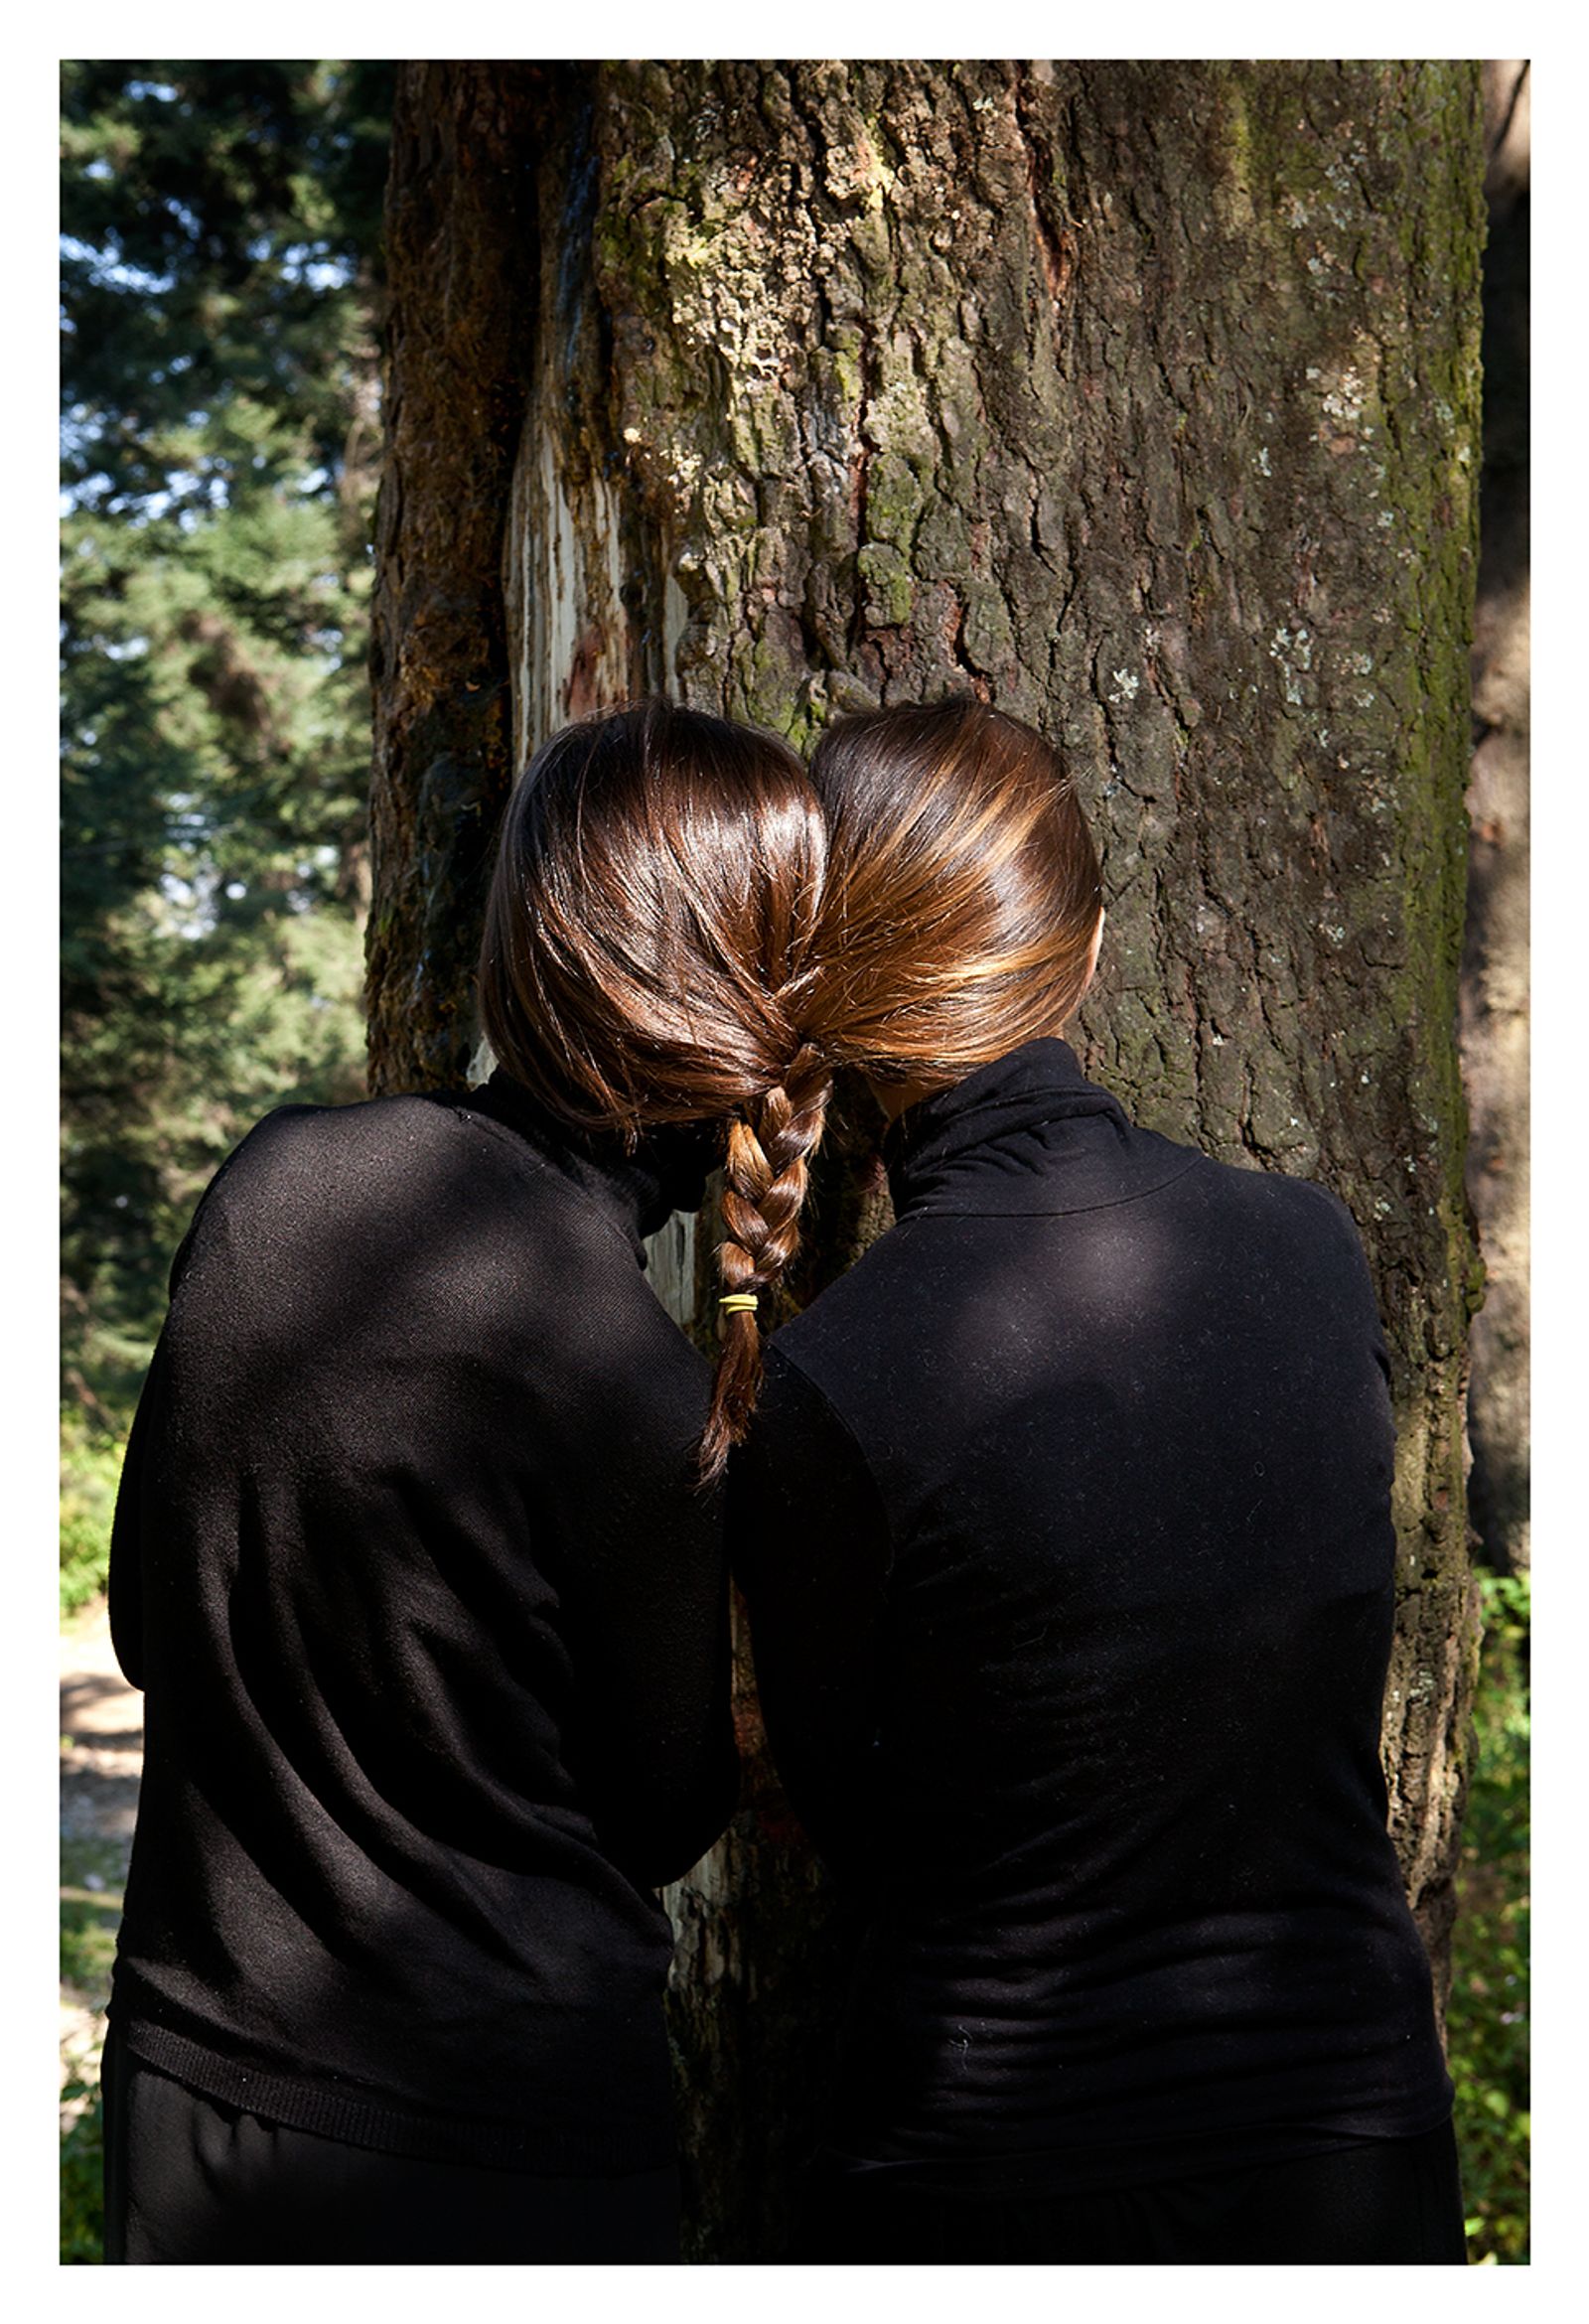 © Mariela Sancari - Image from the The two headed horse photography project